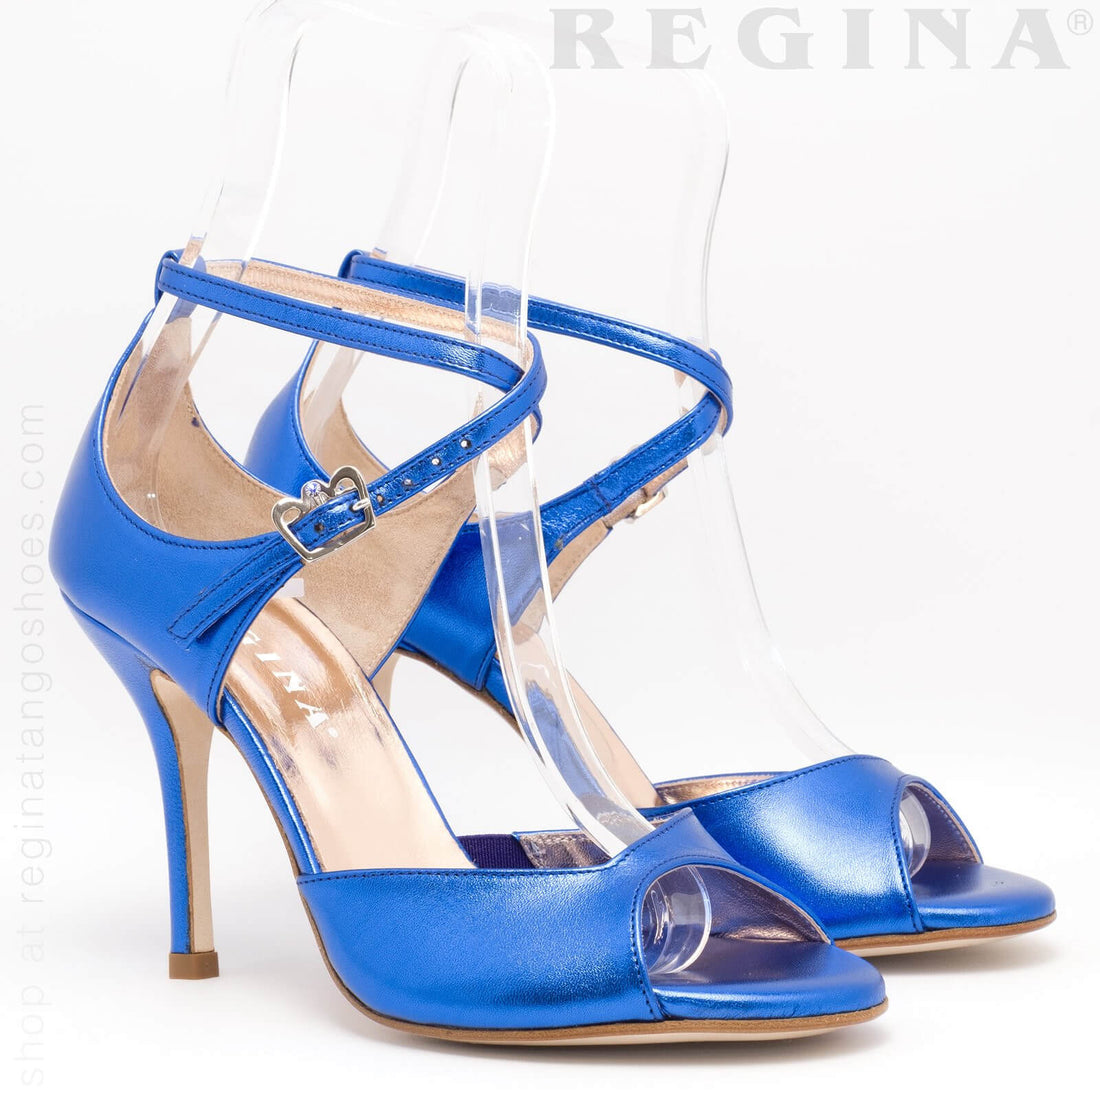 Buenos Aires- Shimmery Blue Tango Shoes Leather Sole